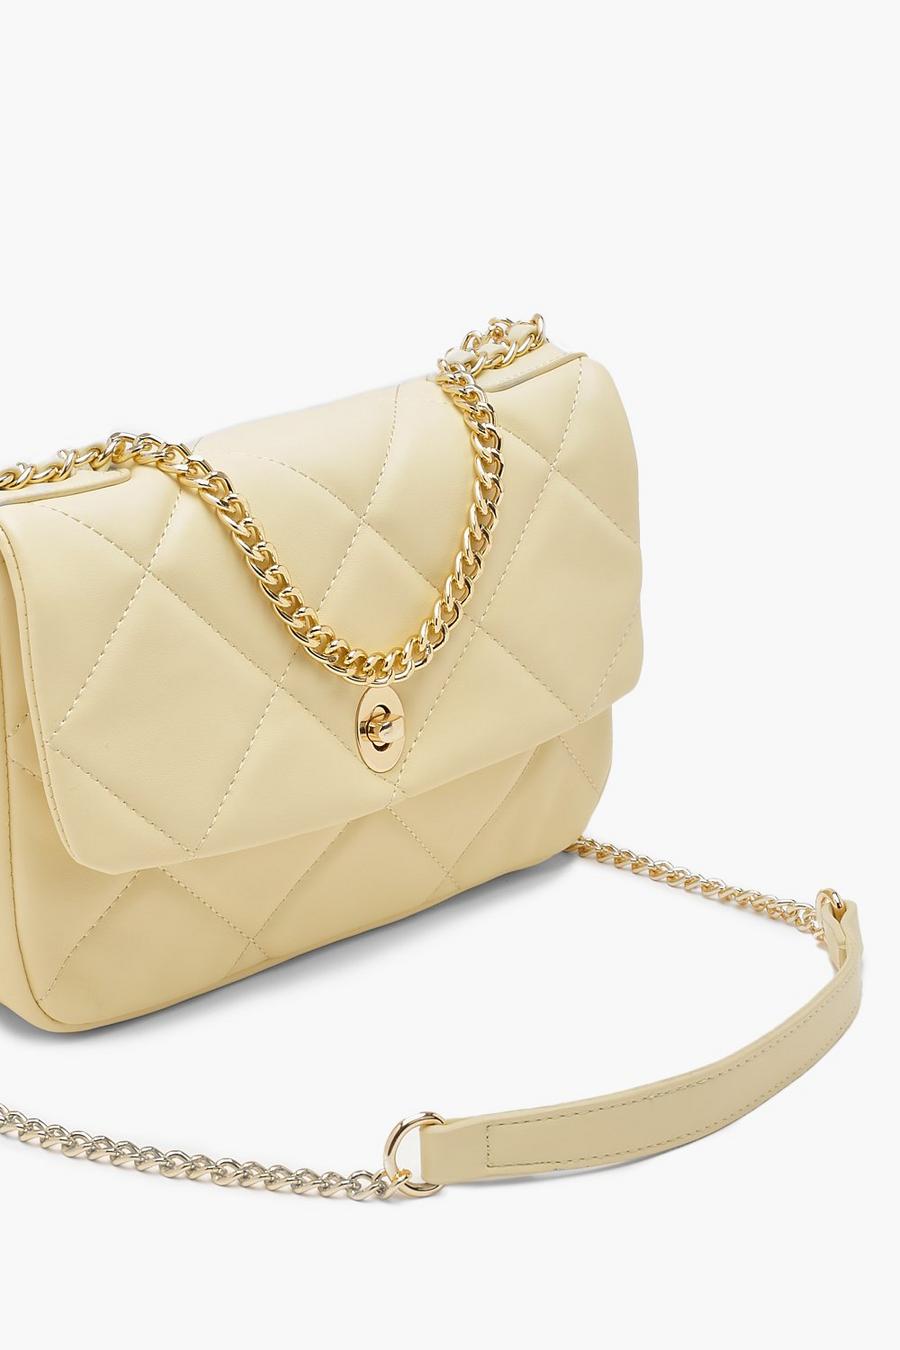 Lemon yellow Pastel Quilted Chain Strap Shoulder Bag